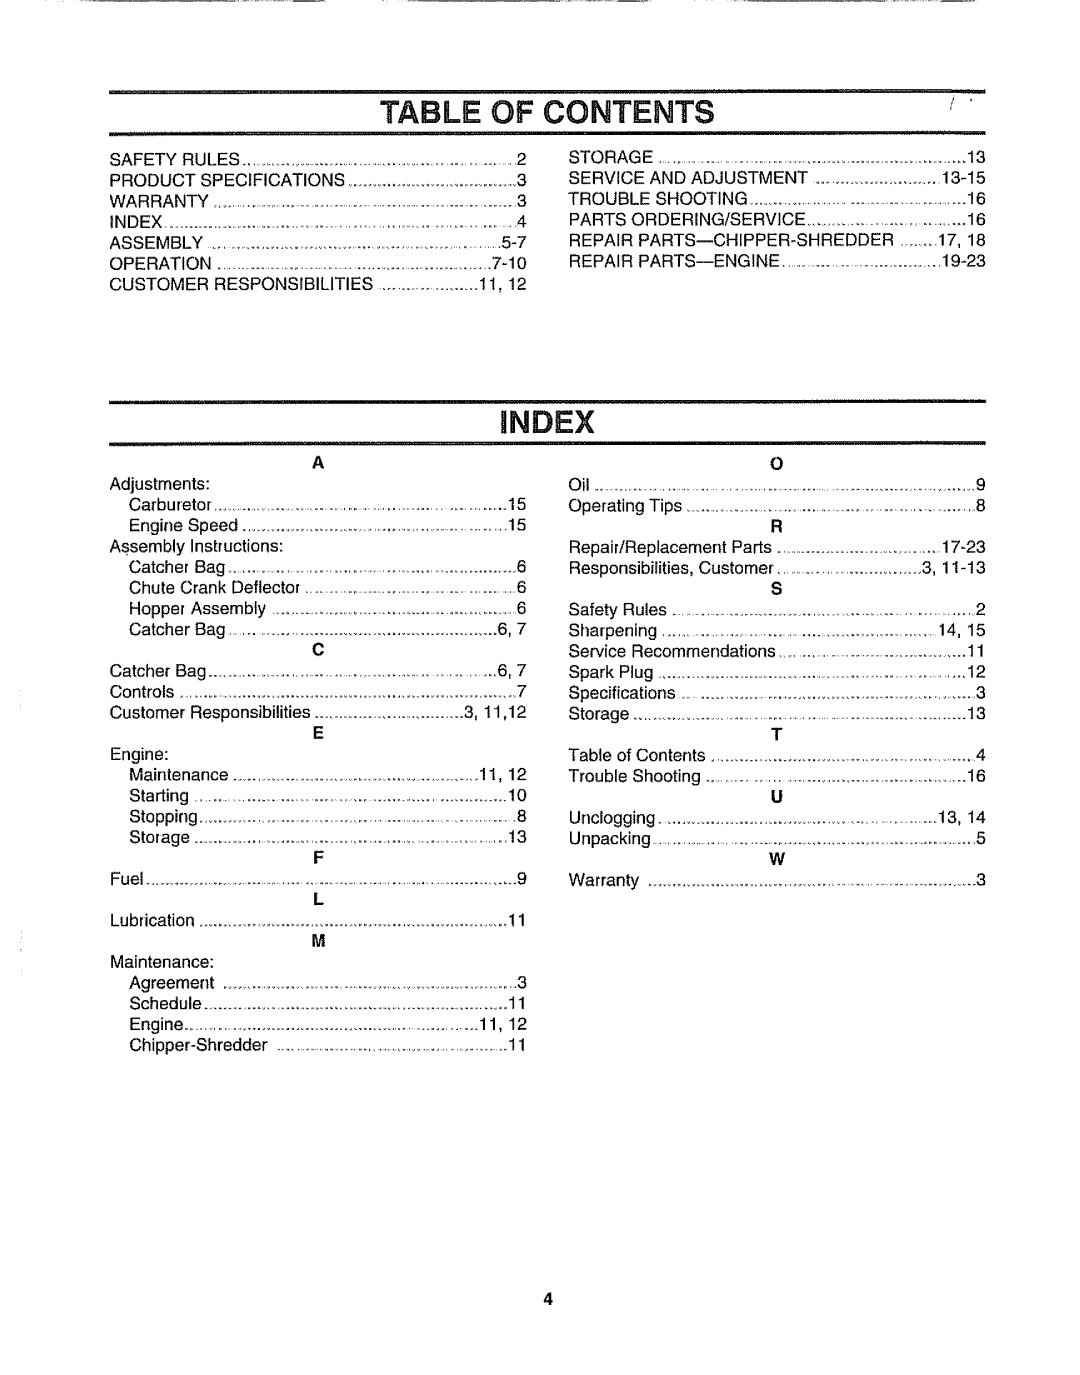 Craftsman 247.795861 owner manual Table Of Contents, Hndex 